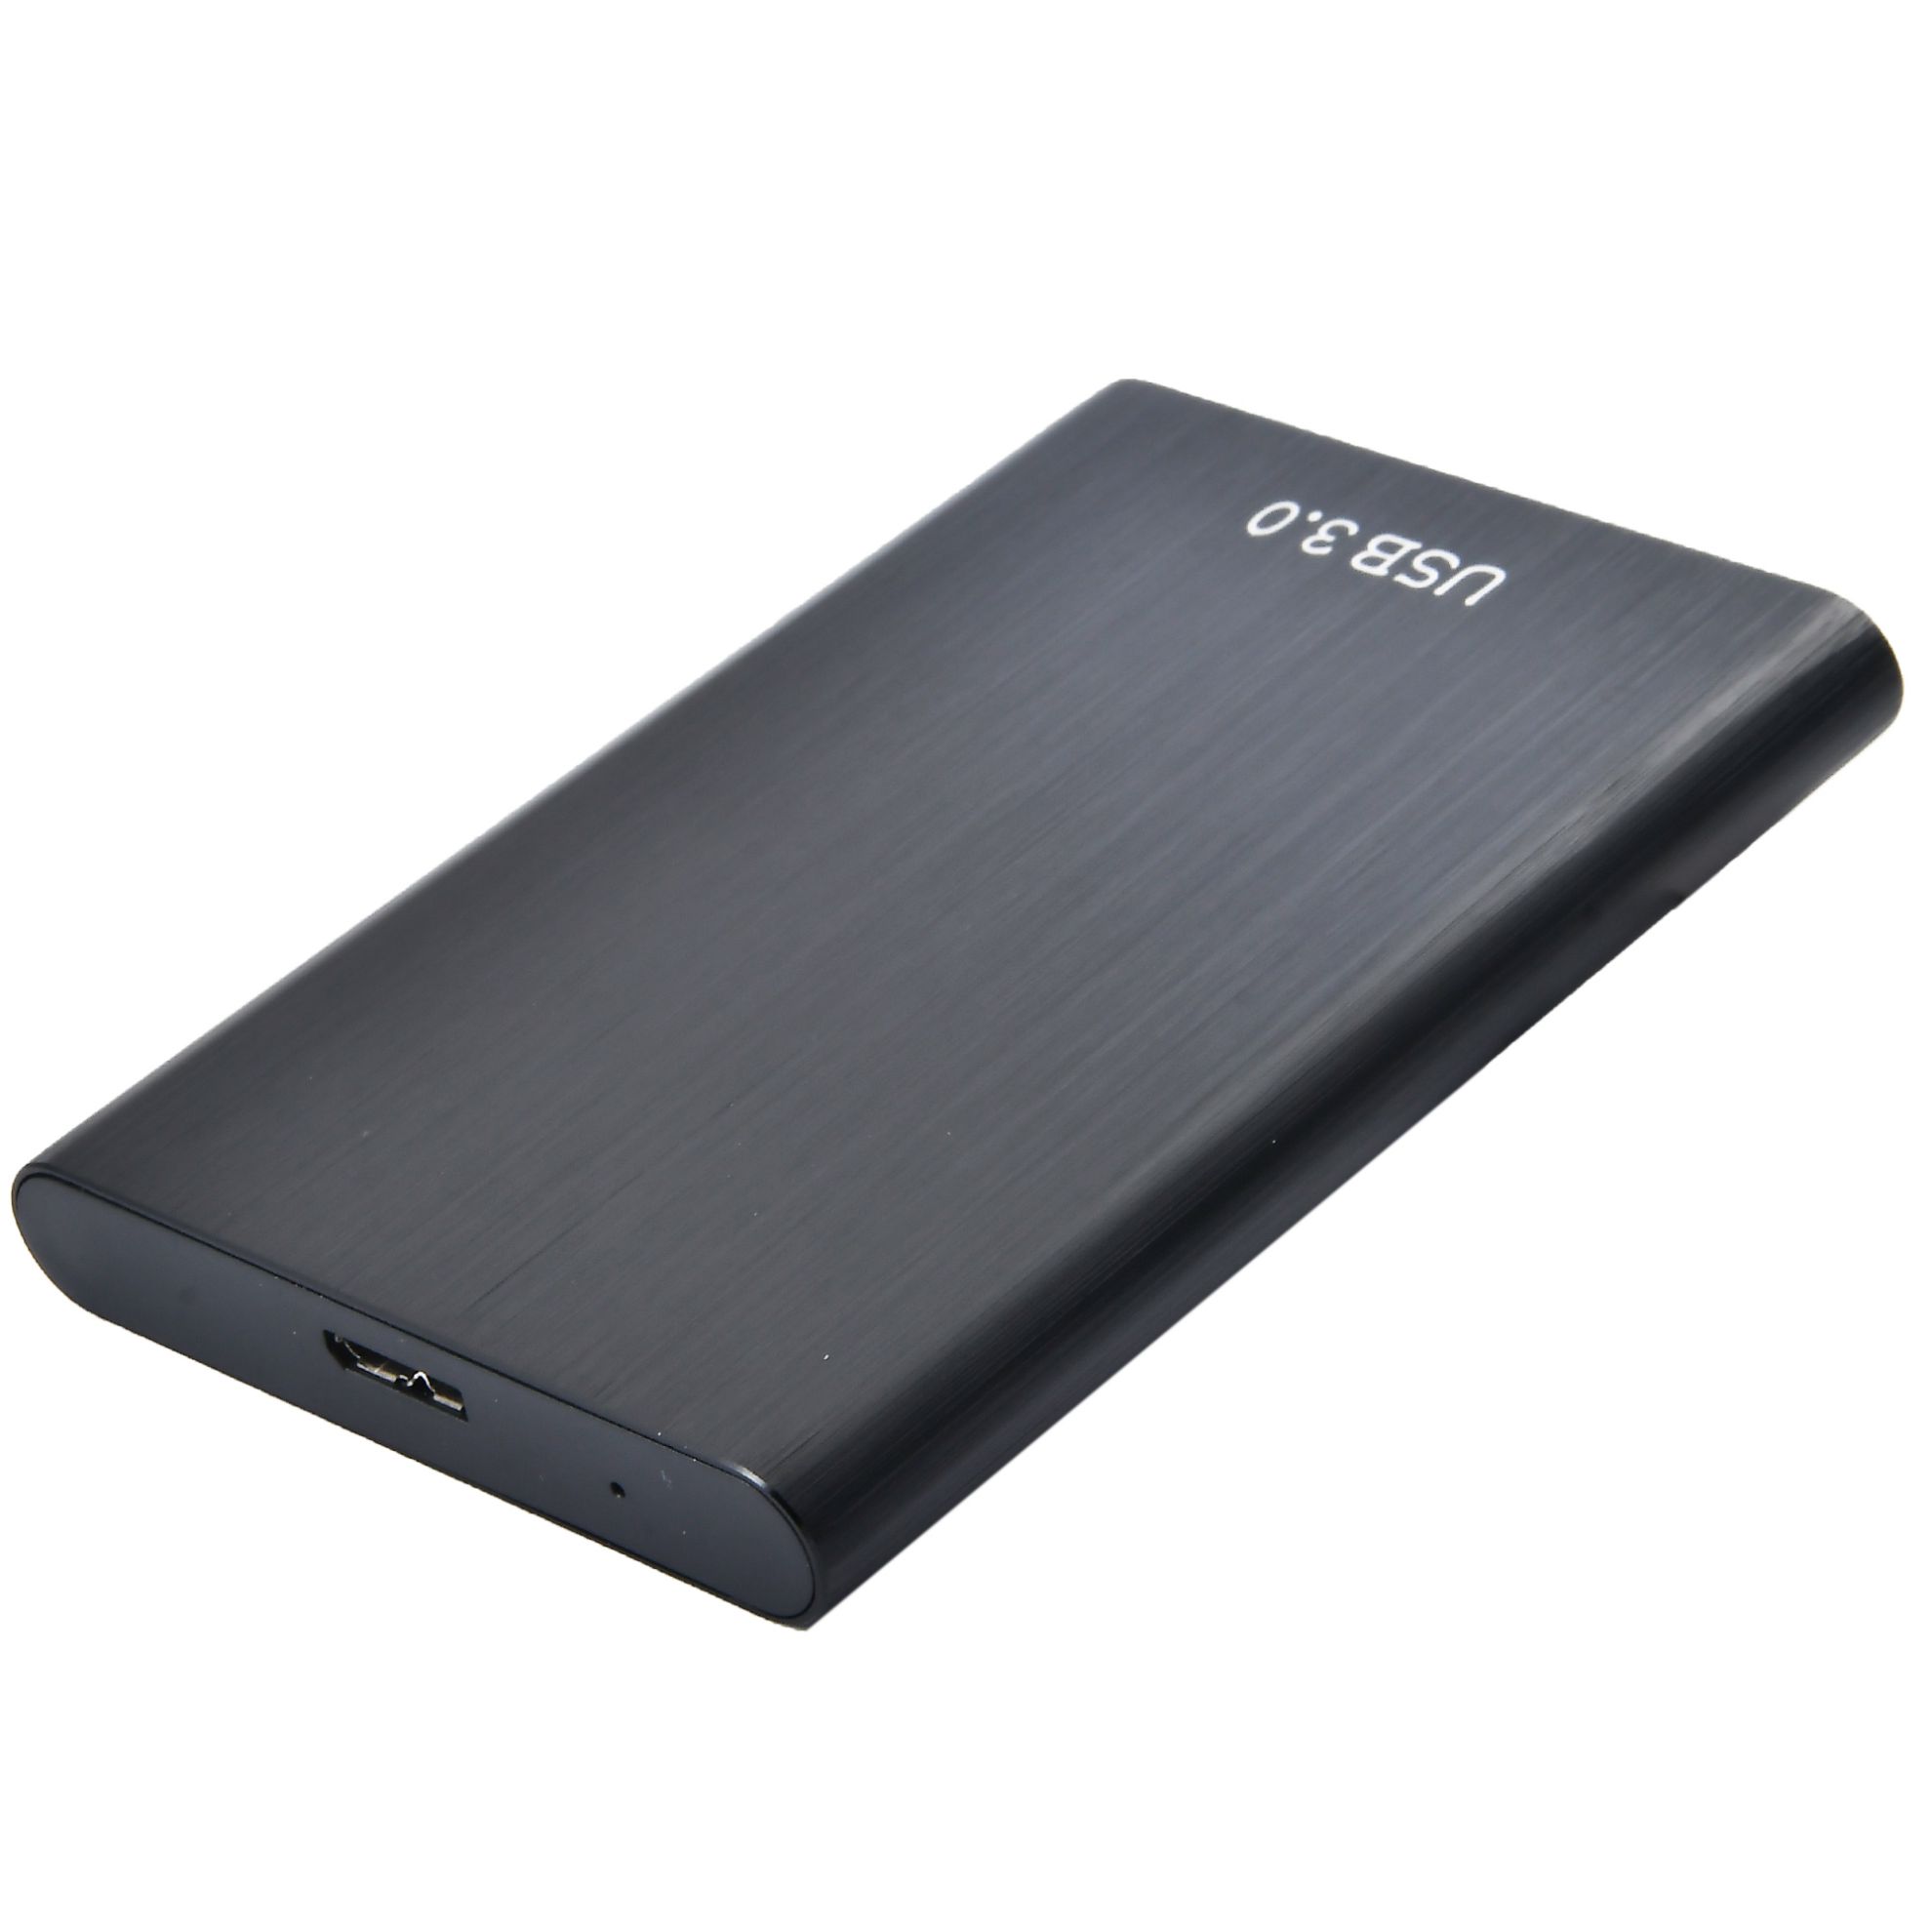 2TB External Hard Drive Portable Hard Drive External SSD High Speed USB 3.1 Compatible with PC, Laptop and Mac